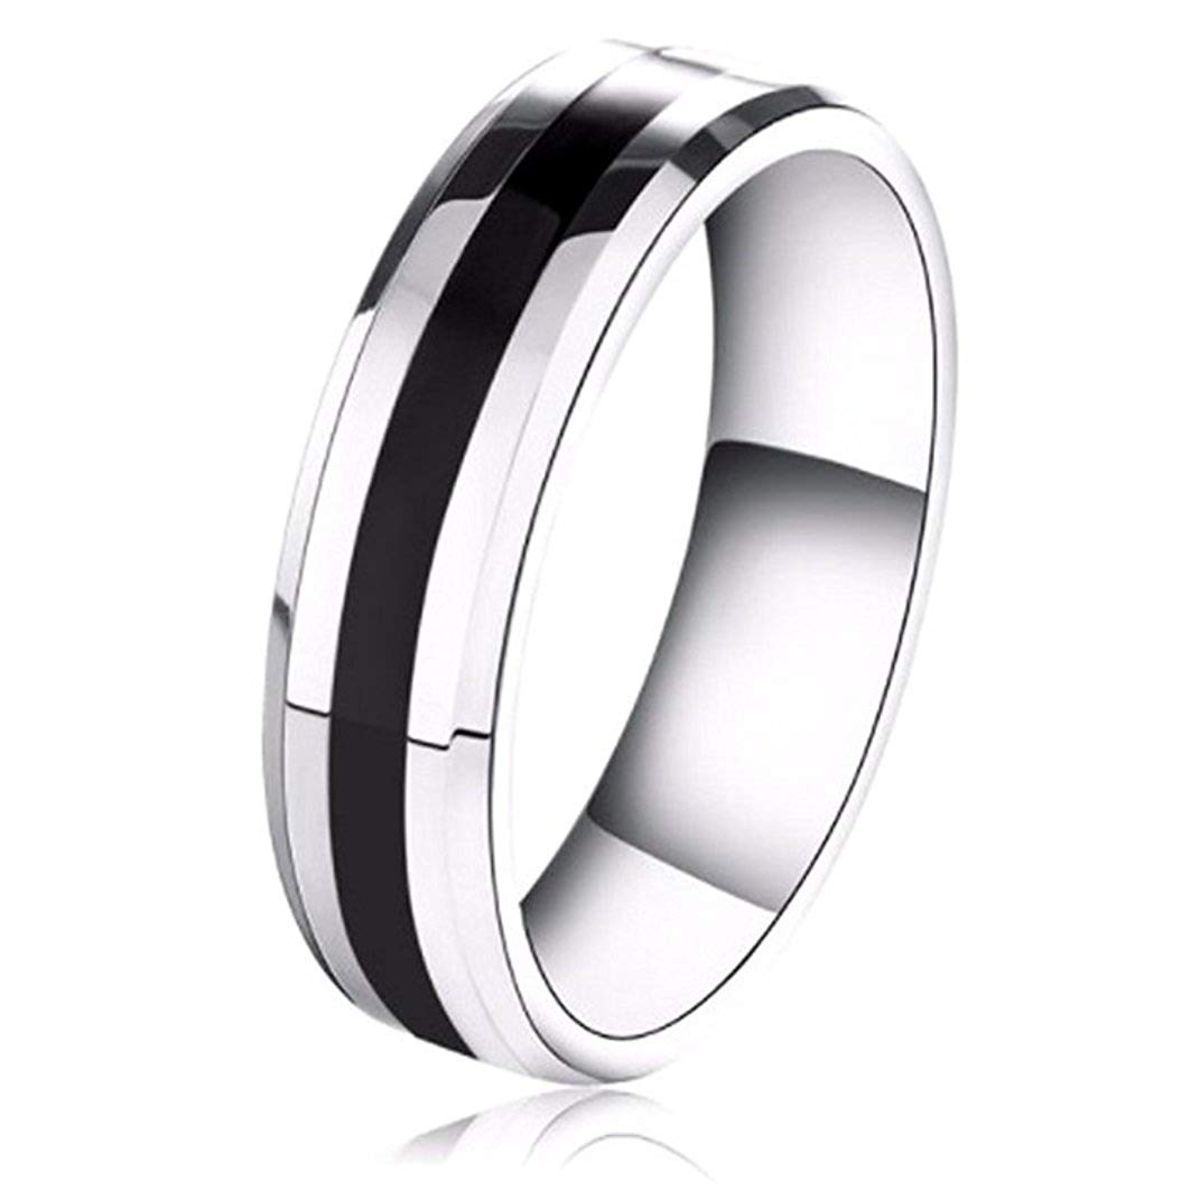 5mm Men Wedding Band|men's 10mm Stainless Steel Cocktail Ring - Gothic Punk  Style Band